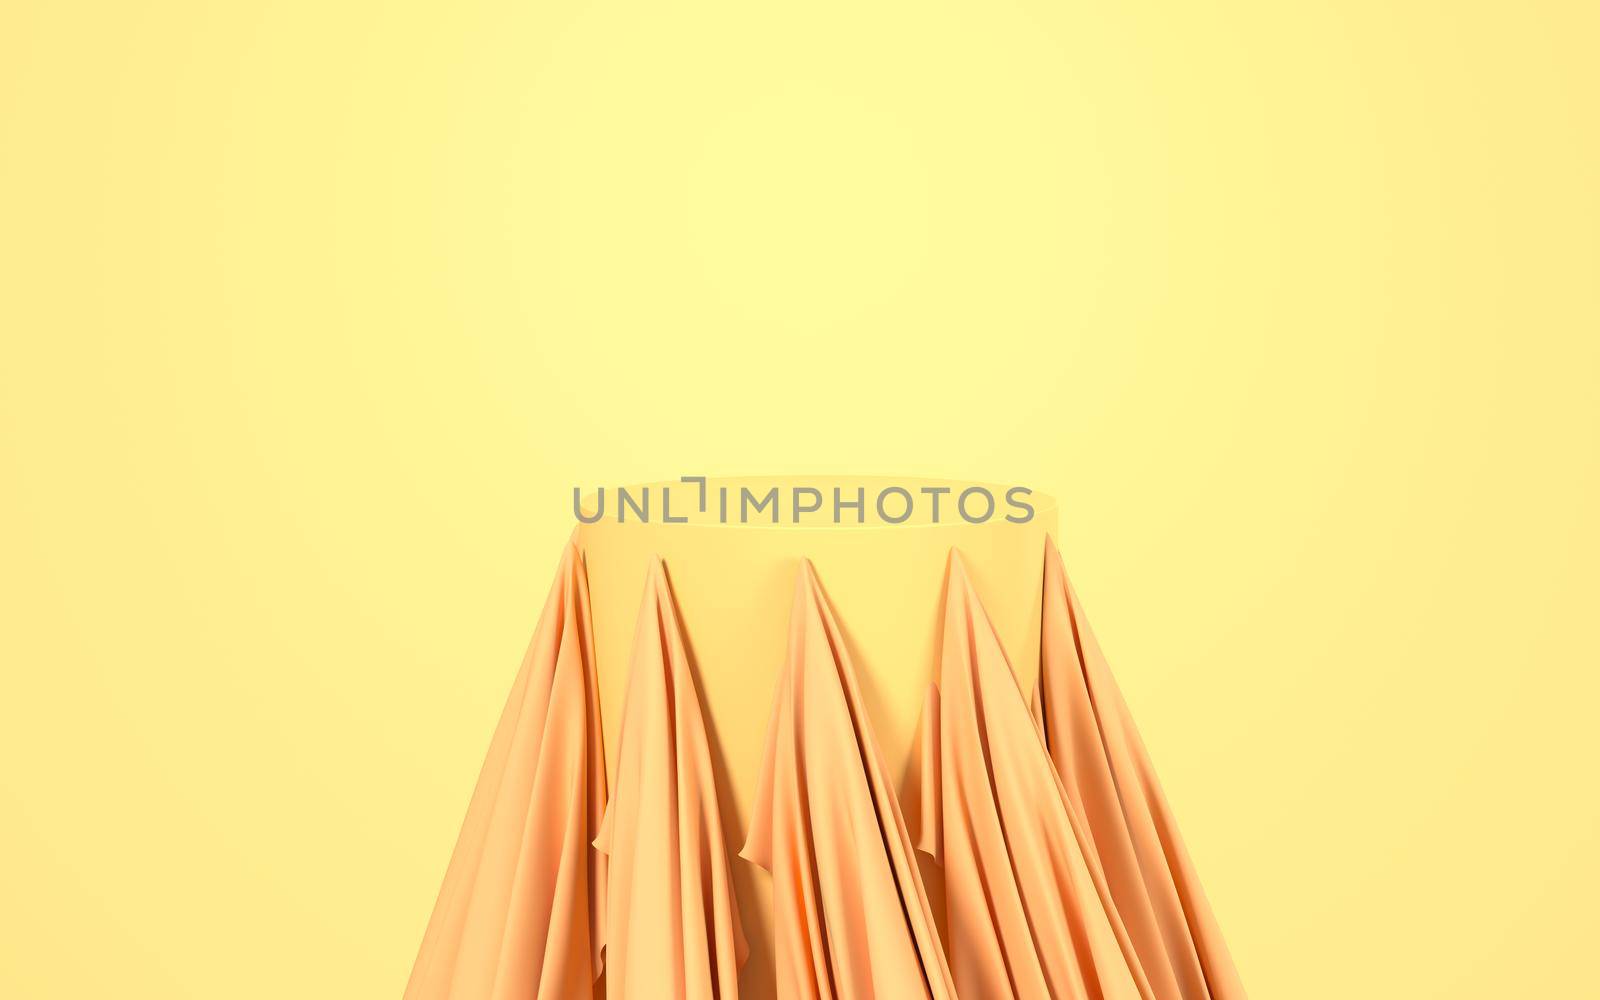 Flowing cloth with yellow background, 3d rendering. Computer digital drawing.